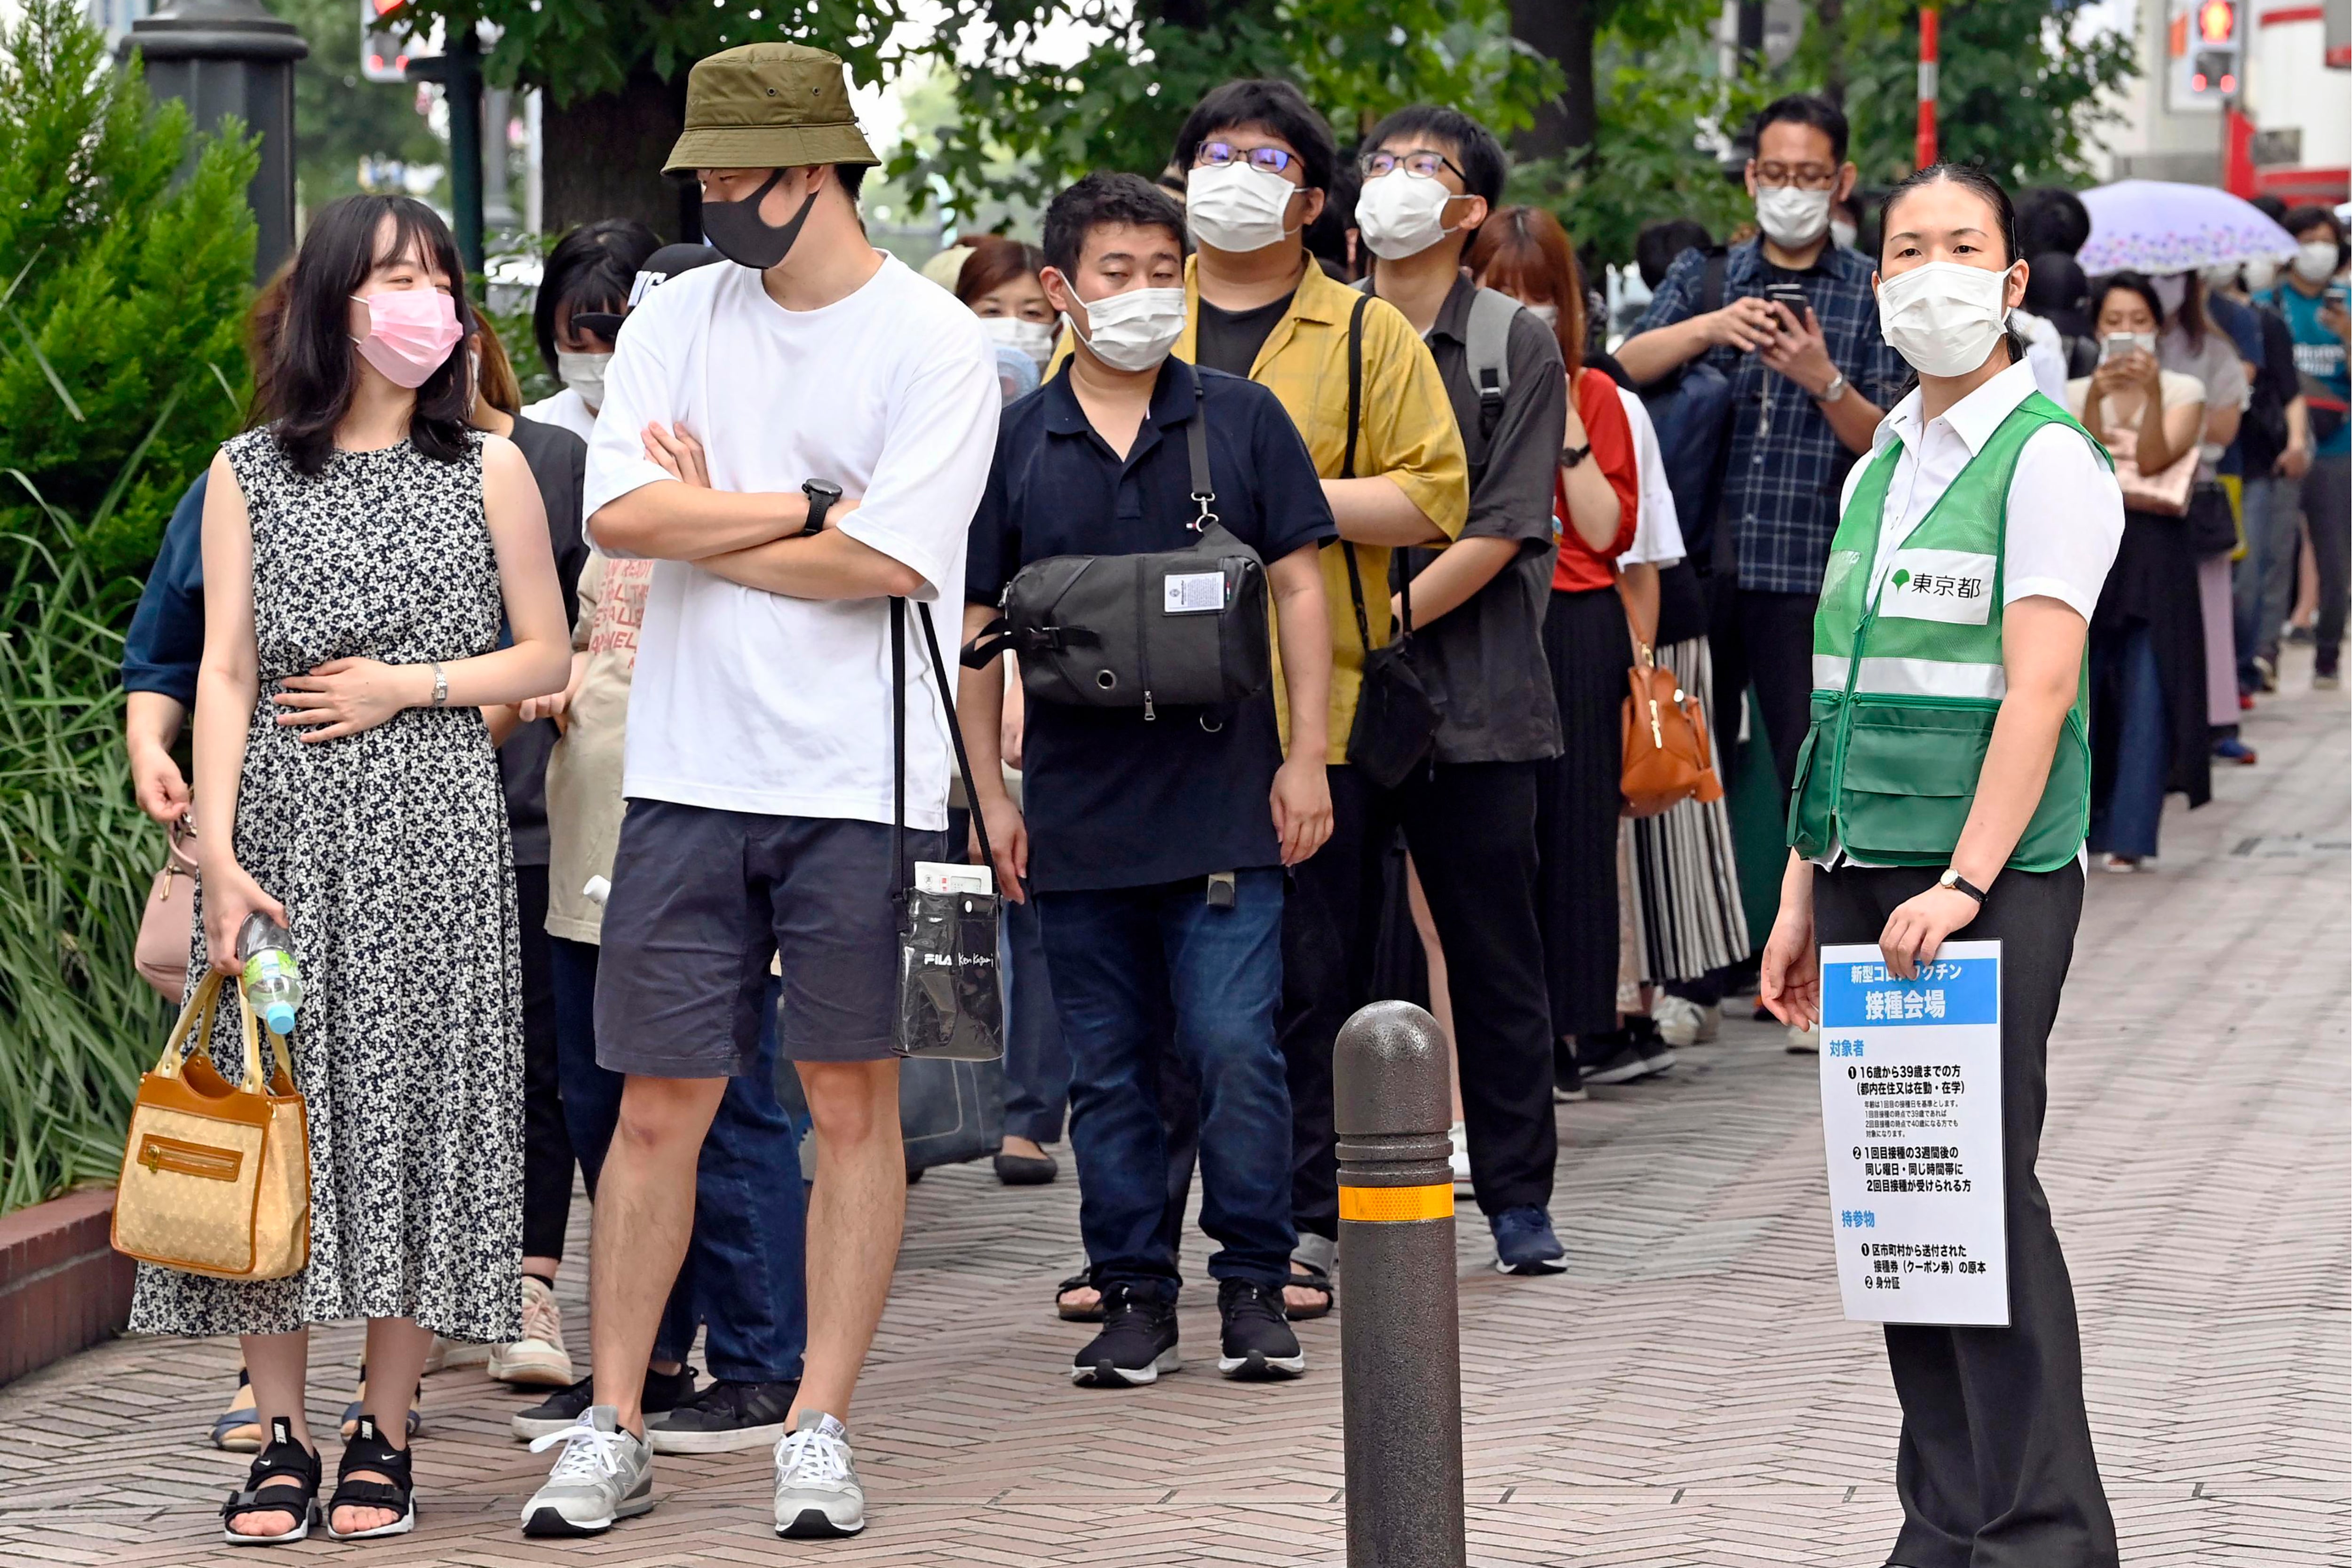 People wait in line to get lottery tickets for the coronavirus vaccine at the Shibuya district in Tokyo Saturday